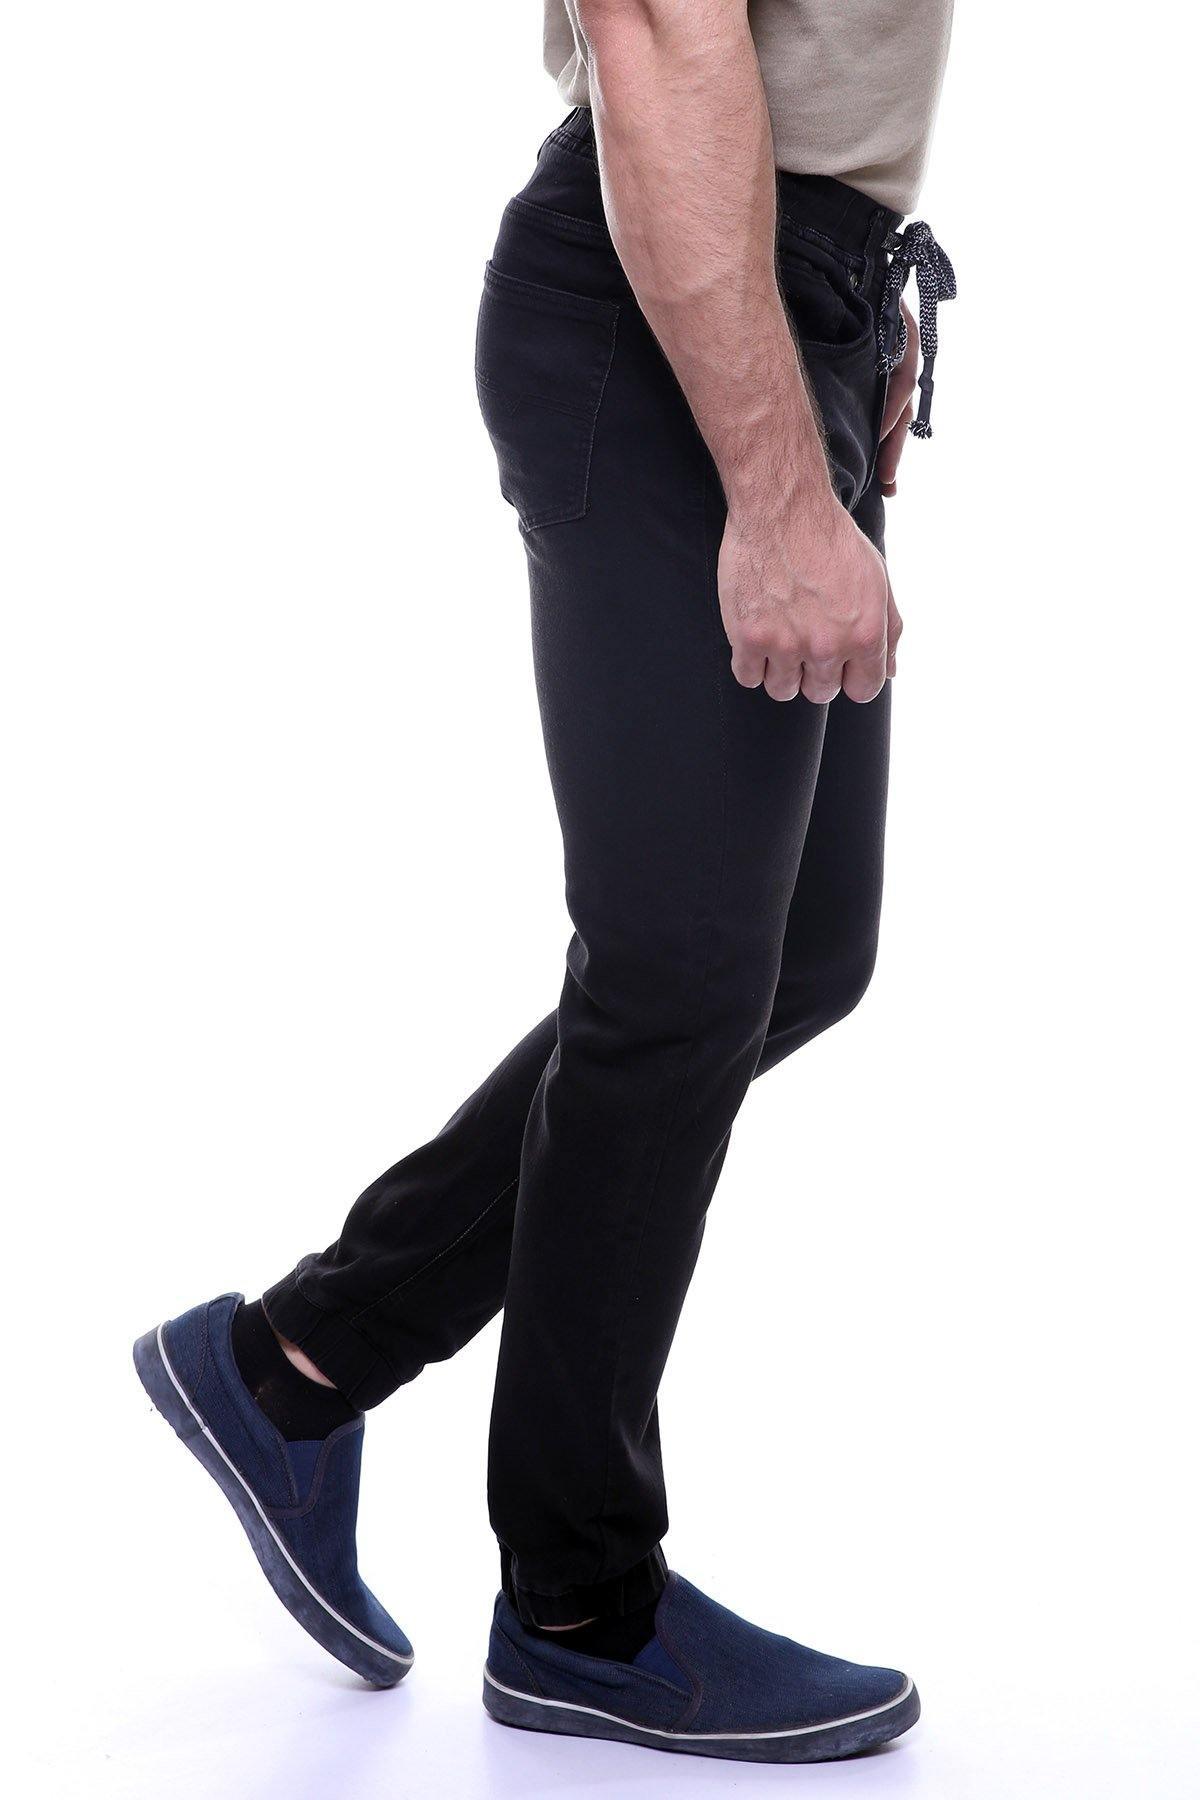 Jeans Trouser 5 Pocket Black at Charcoal Clothing